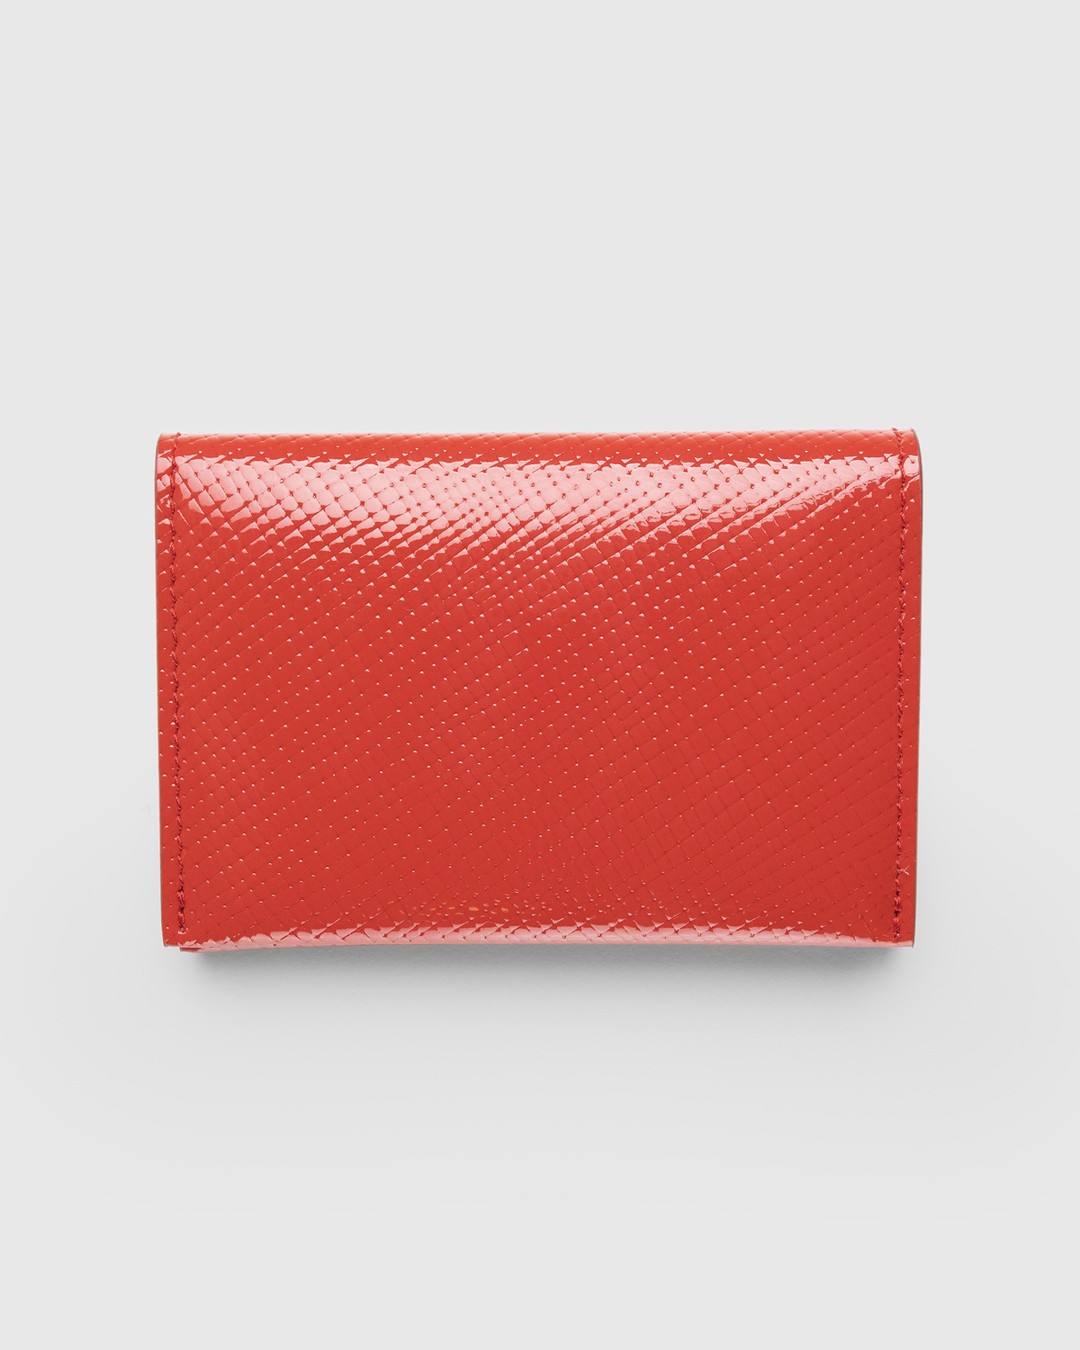 Acne Studios – Folded Card Holder Red - Wallets - Red - Image 2